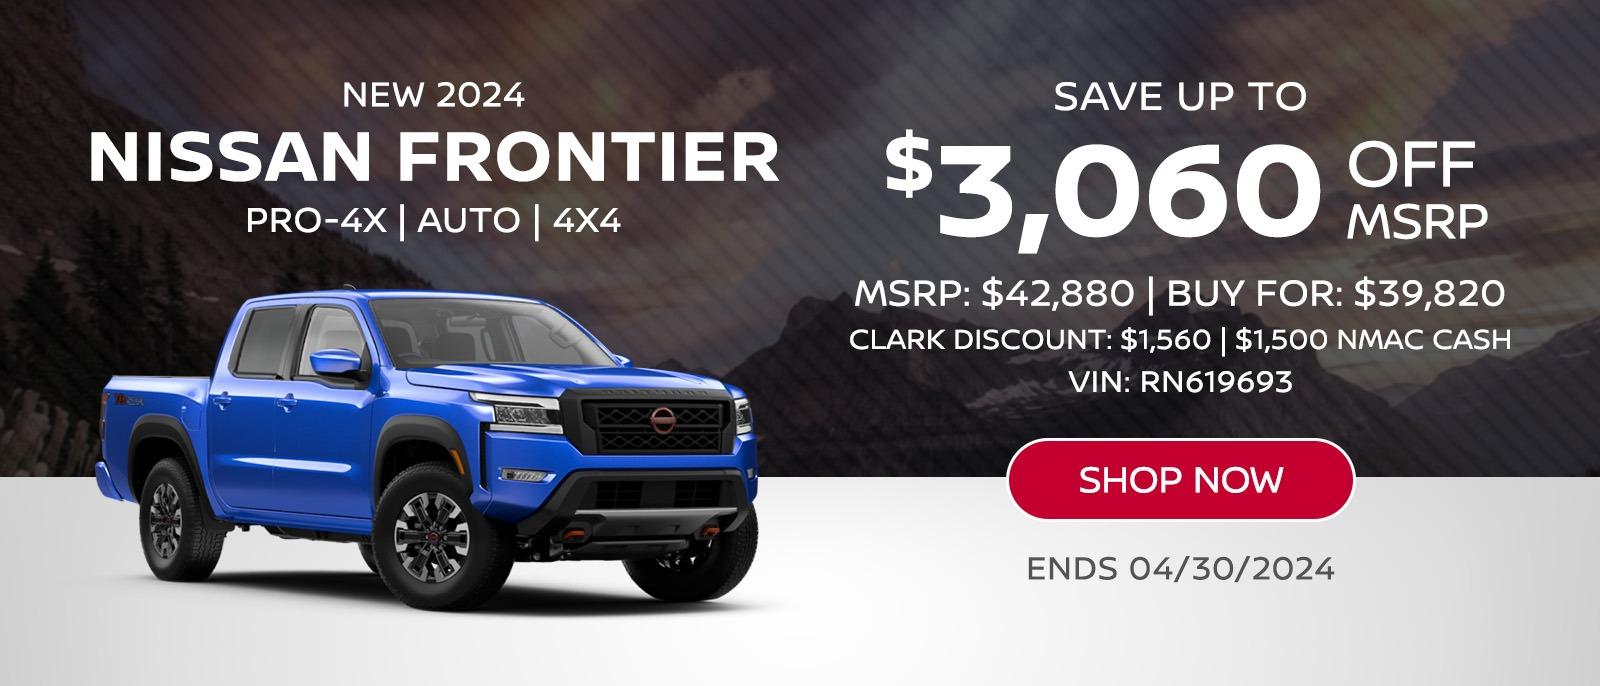 Save up to $3,060 off msrp